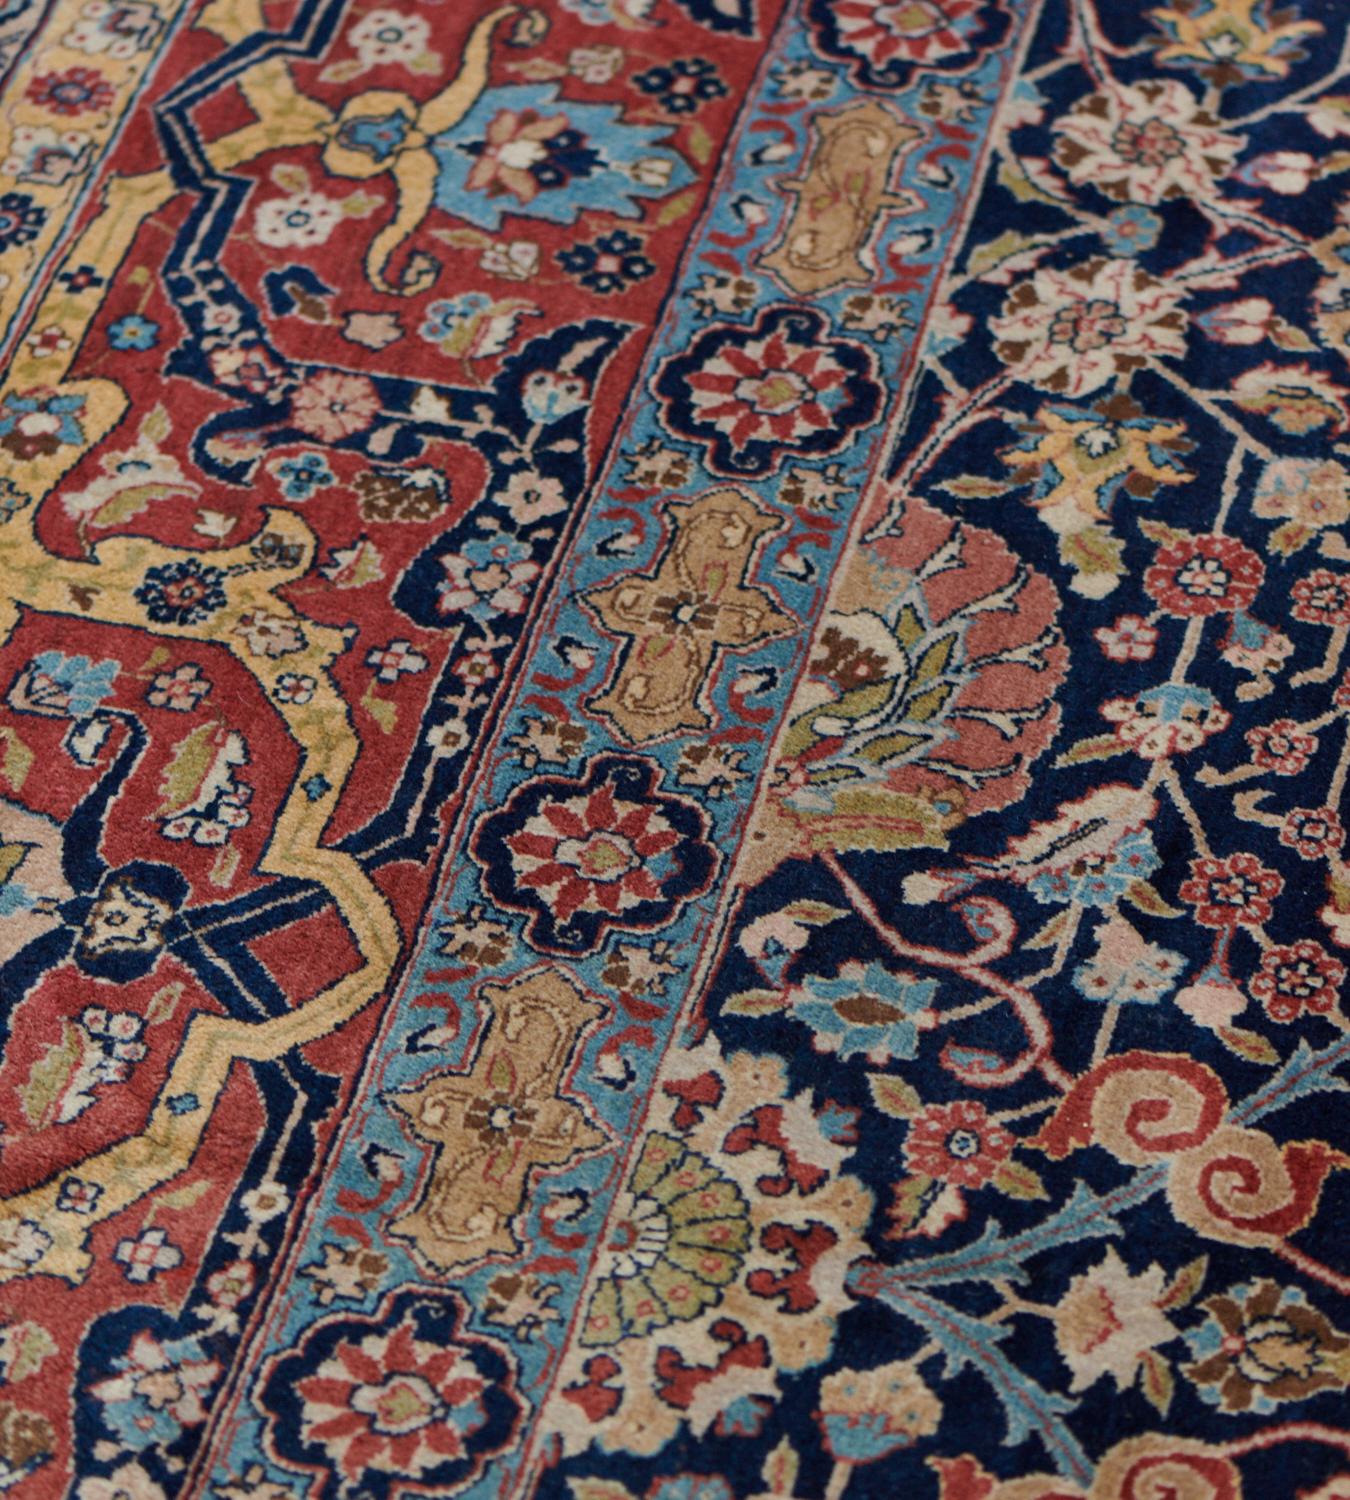 This antique, circa 1910, Persian Tabriz rug has an indigo-blue field with an overall design of polychrome palmette vine surrounded by dense floral sprays and split palmettes, in a broad shaded red border of angular golden-yellow and indigo-blue